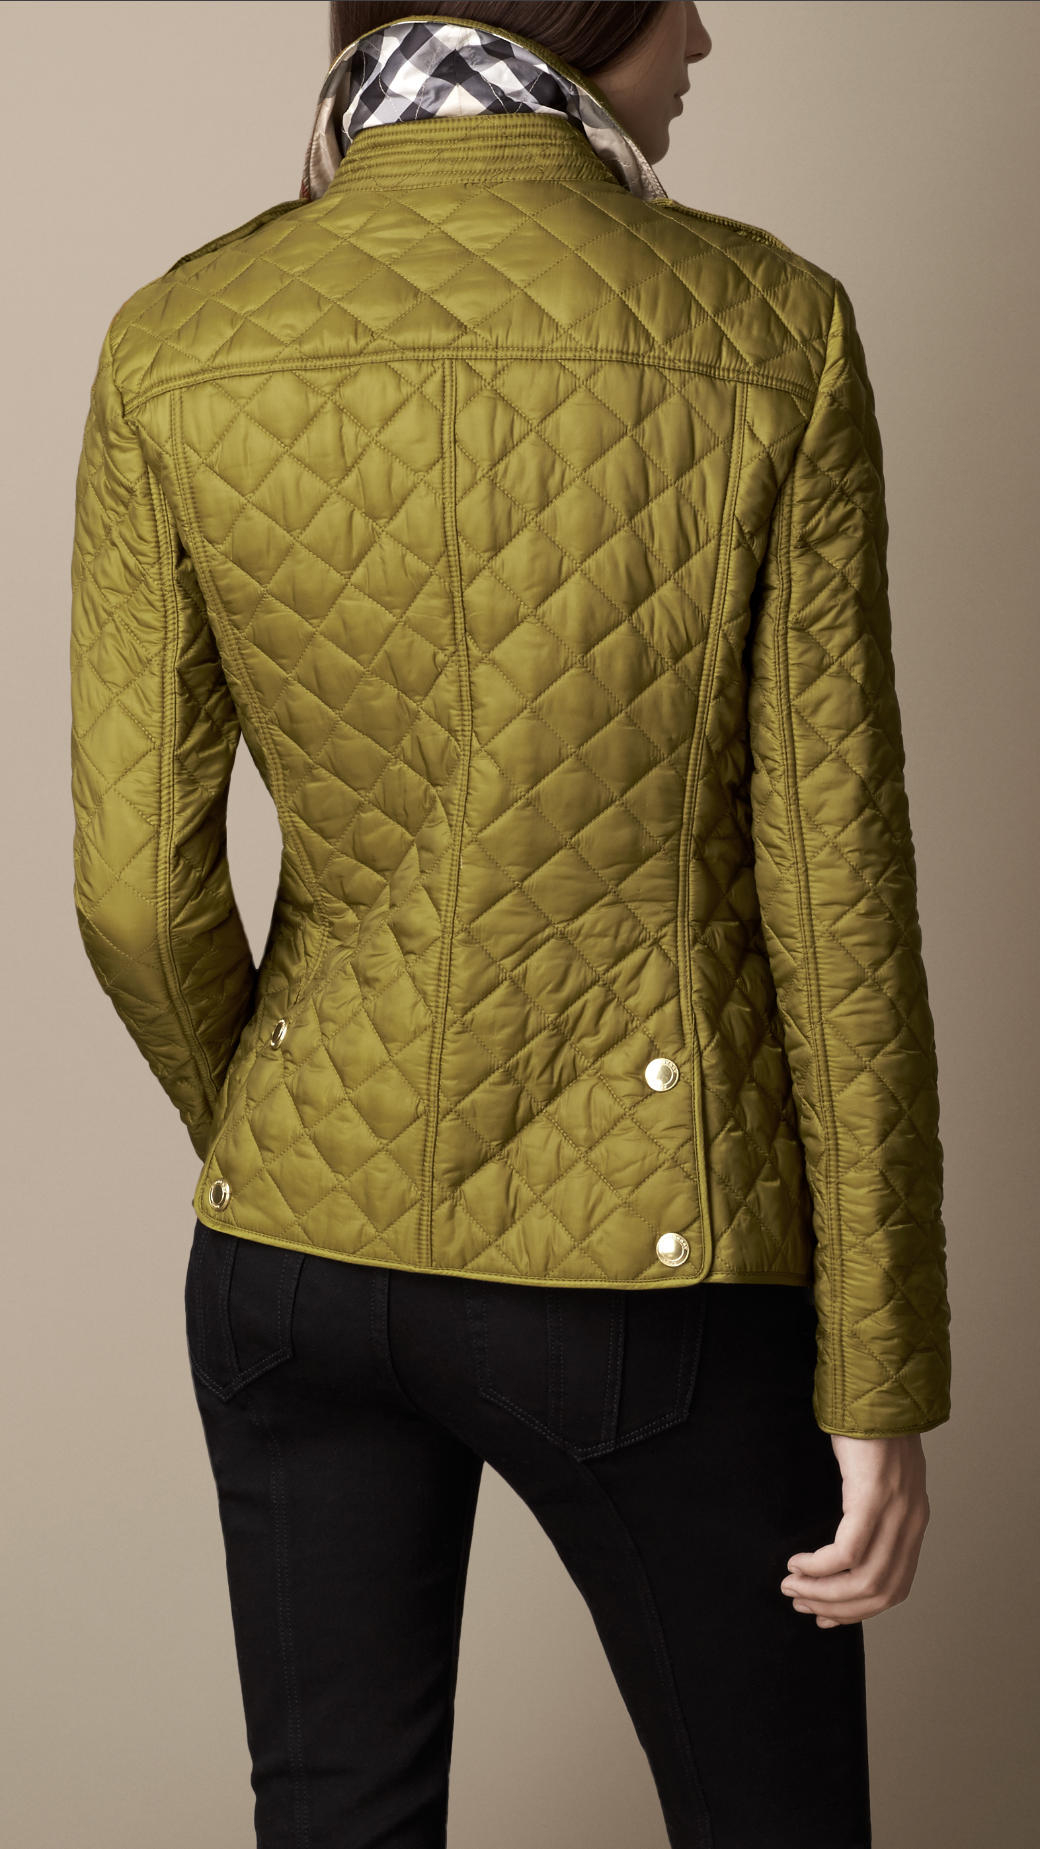 Lyst - Burberry Heritage Quilted Jacket in Green